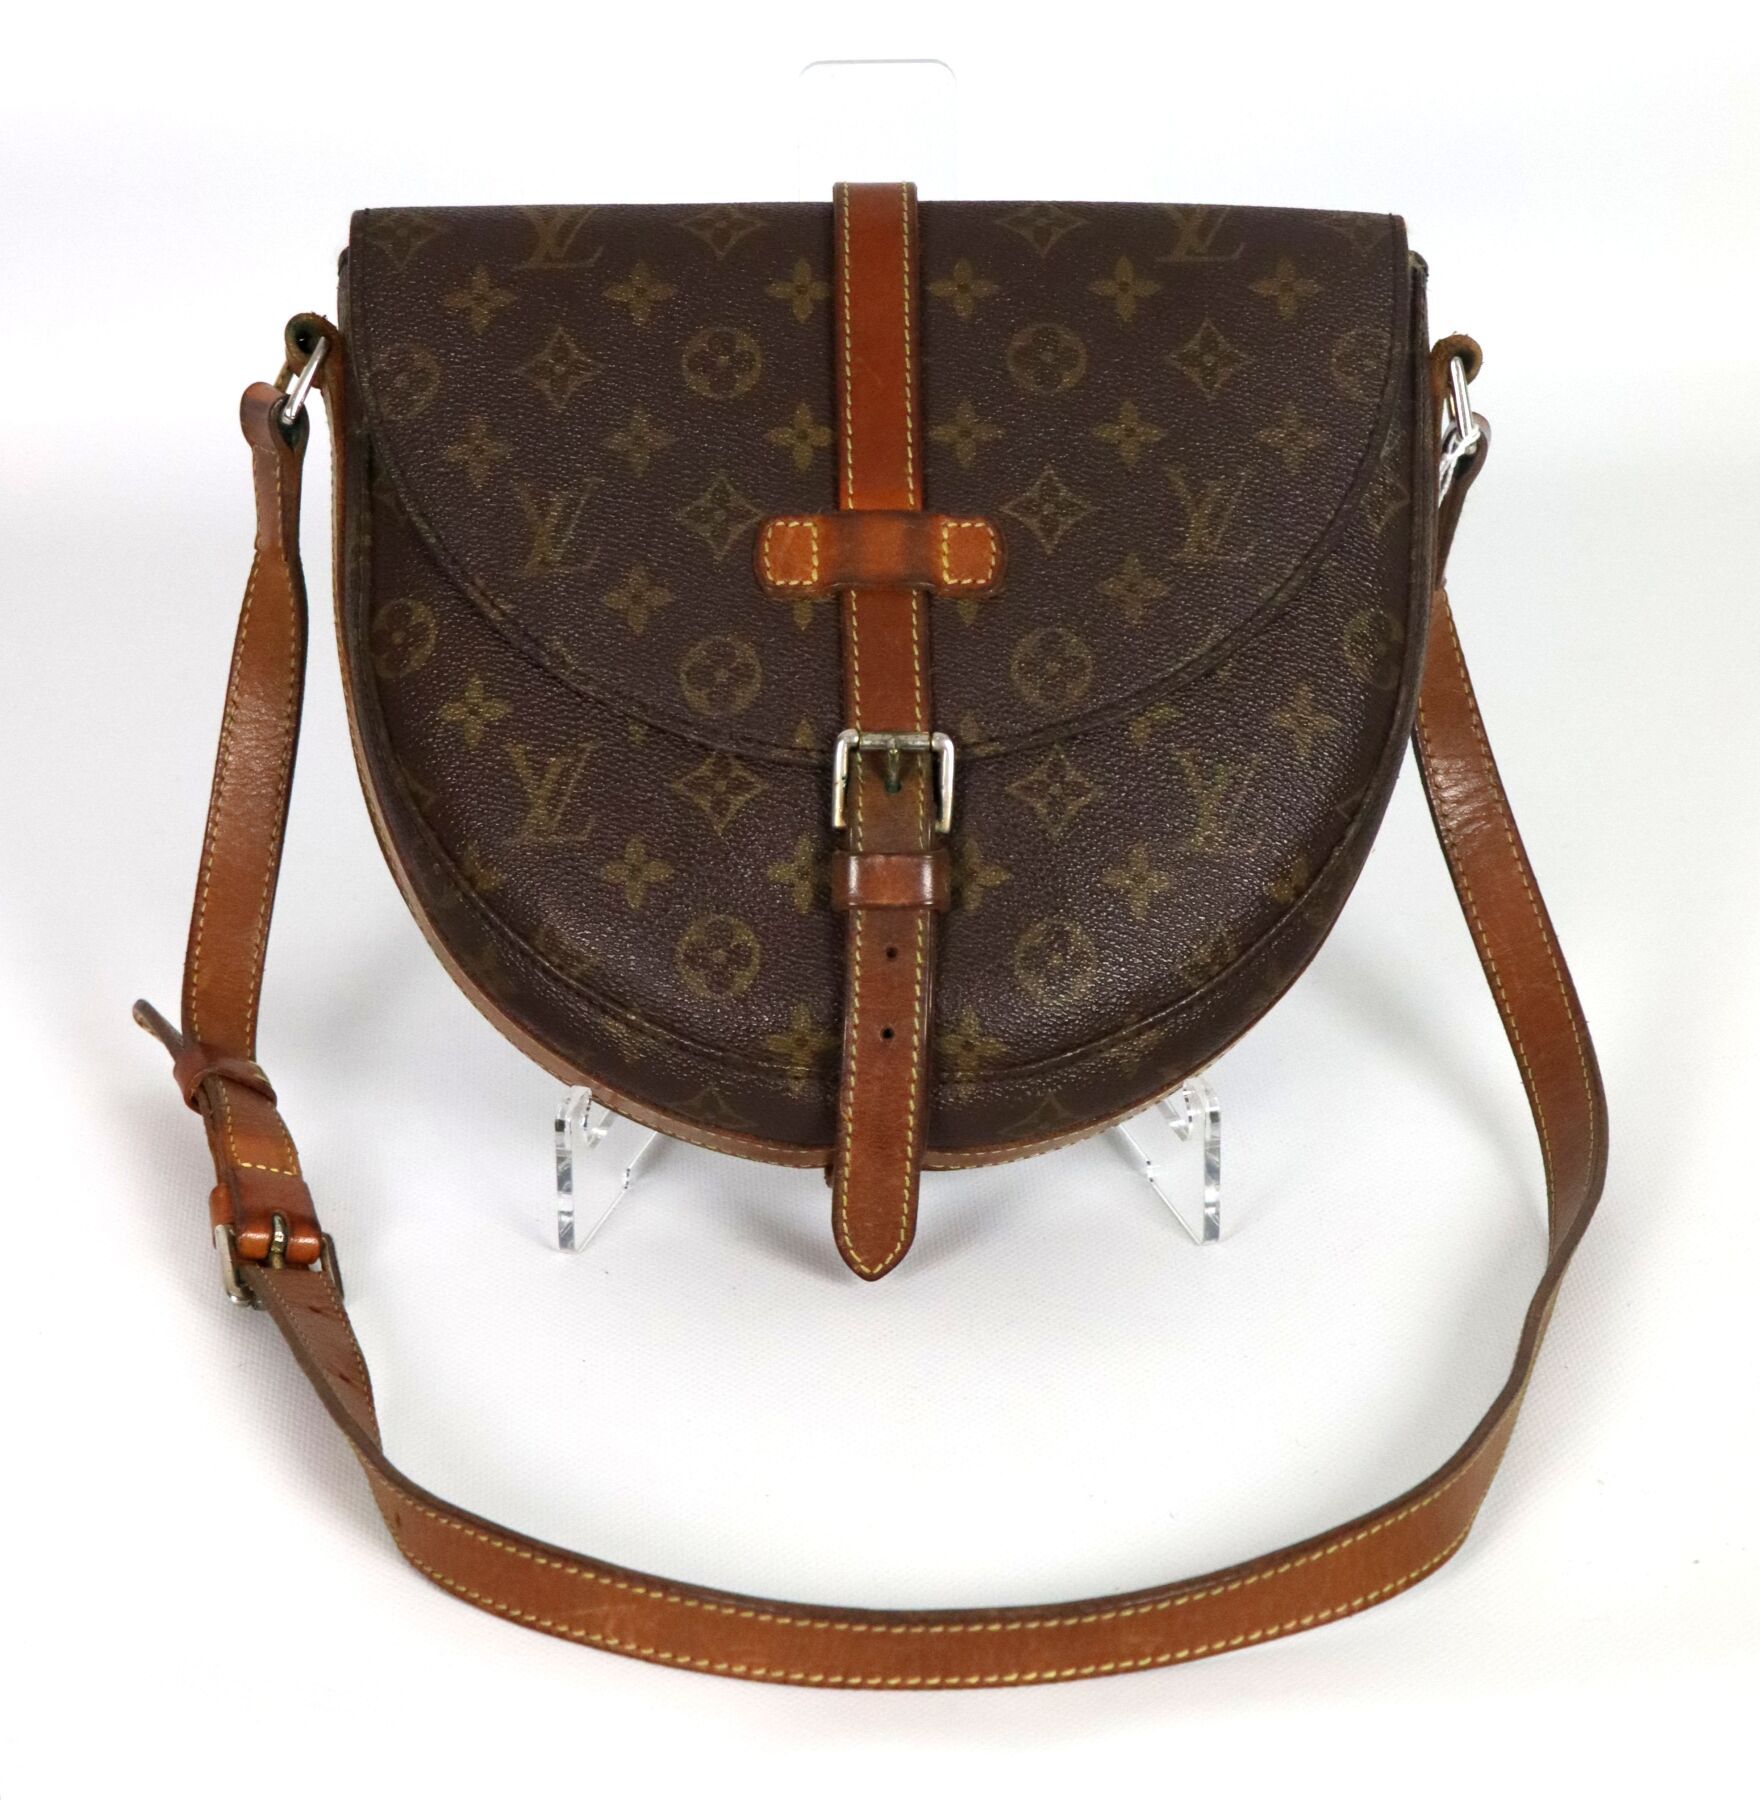 louis vuitton with gold plate on front